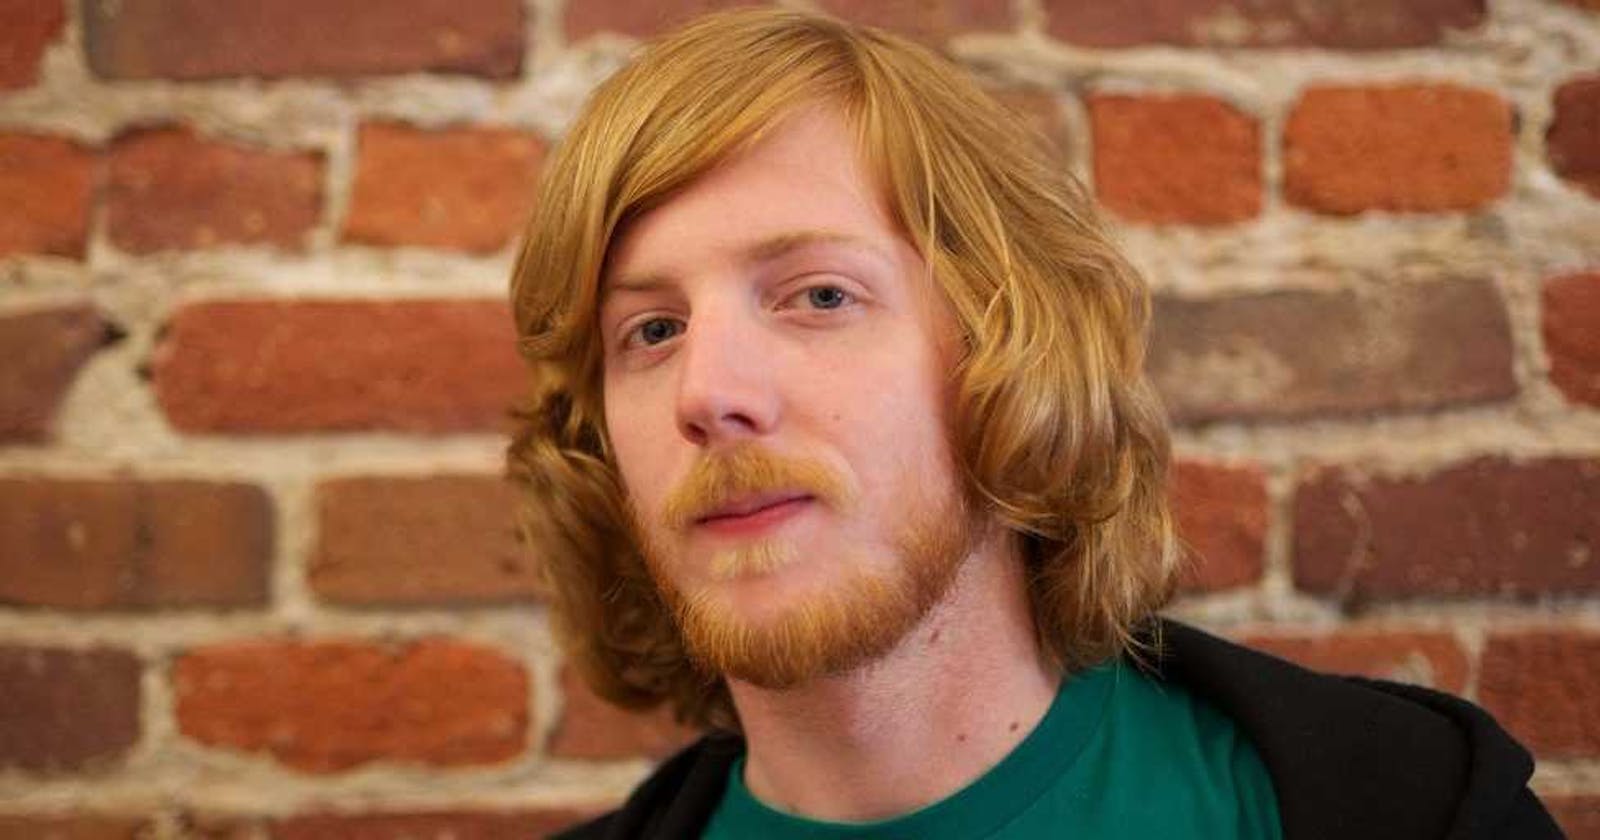 GitHub is undergoing a full-blown overhaul as execs and employees depart